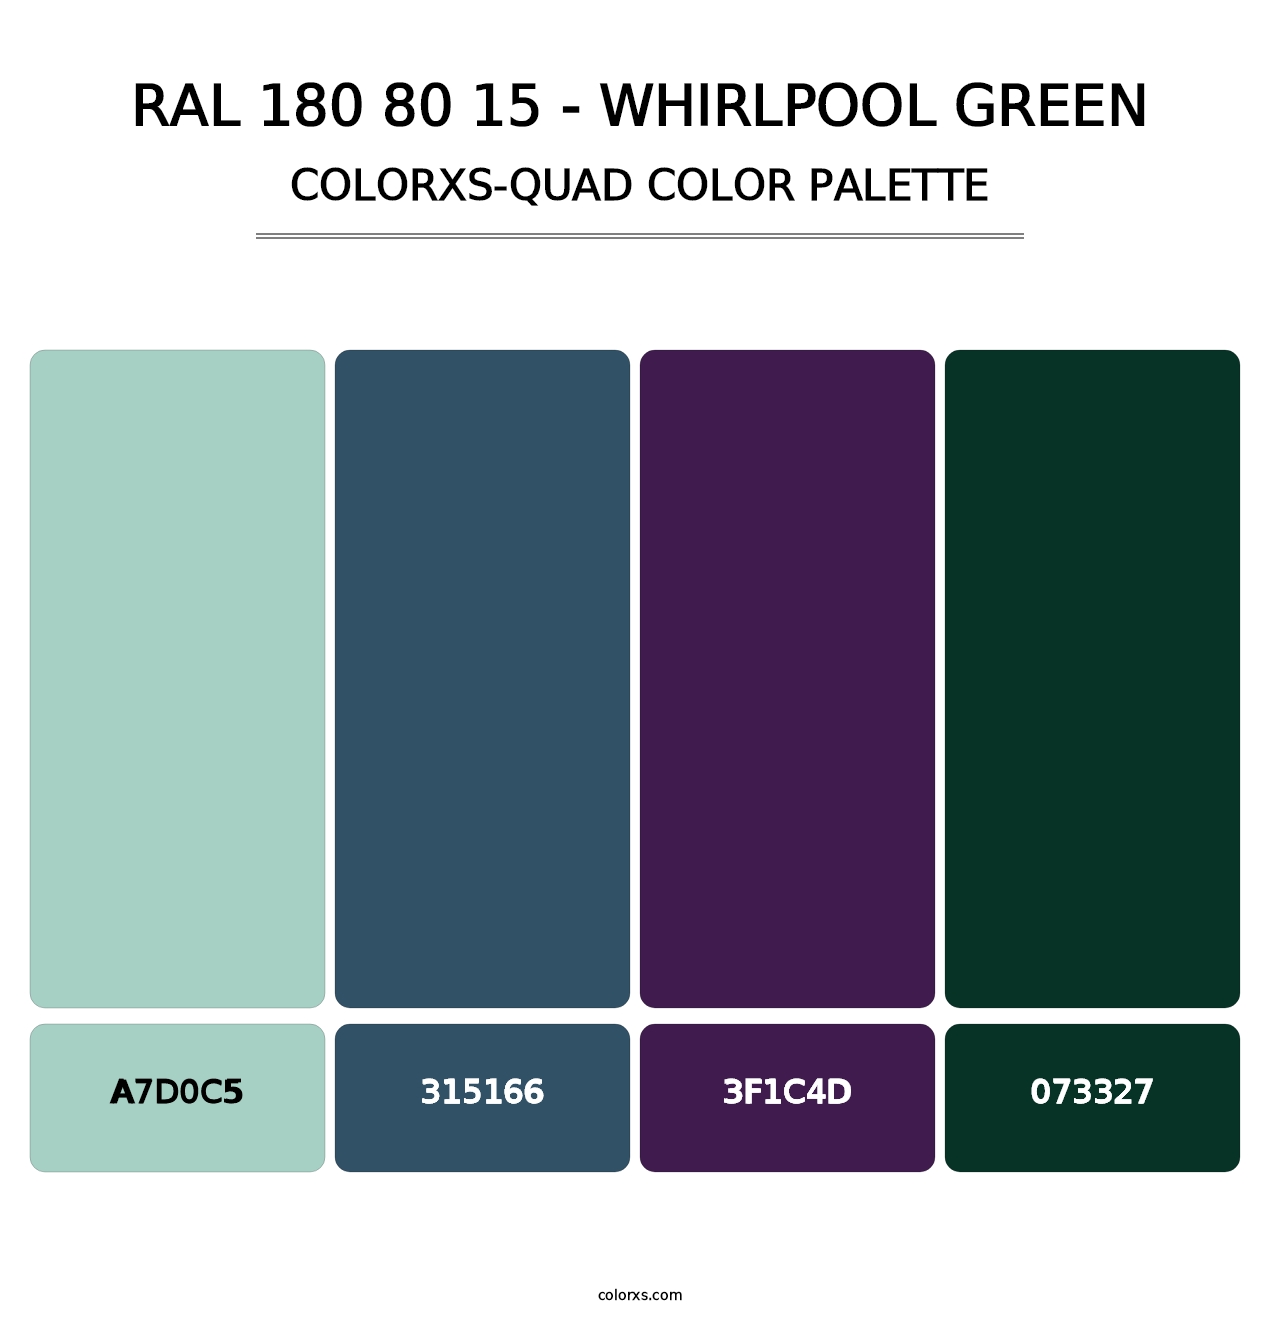 RAL 180 80 15 - Whirlpool Green - Colorxs Quad Palette